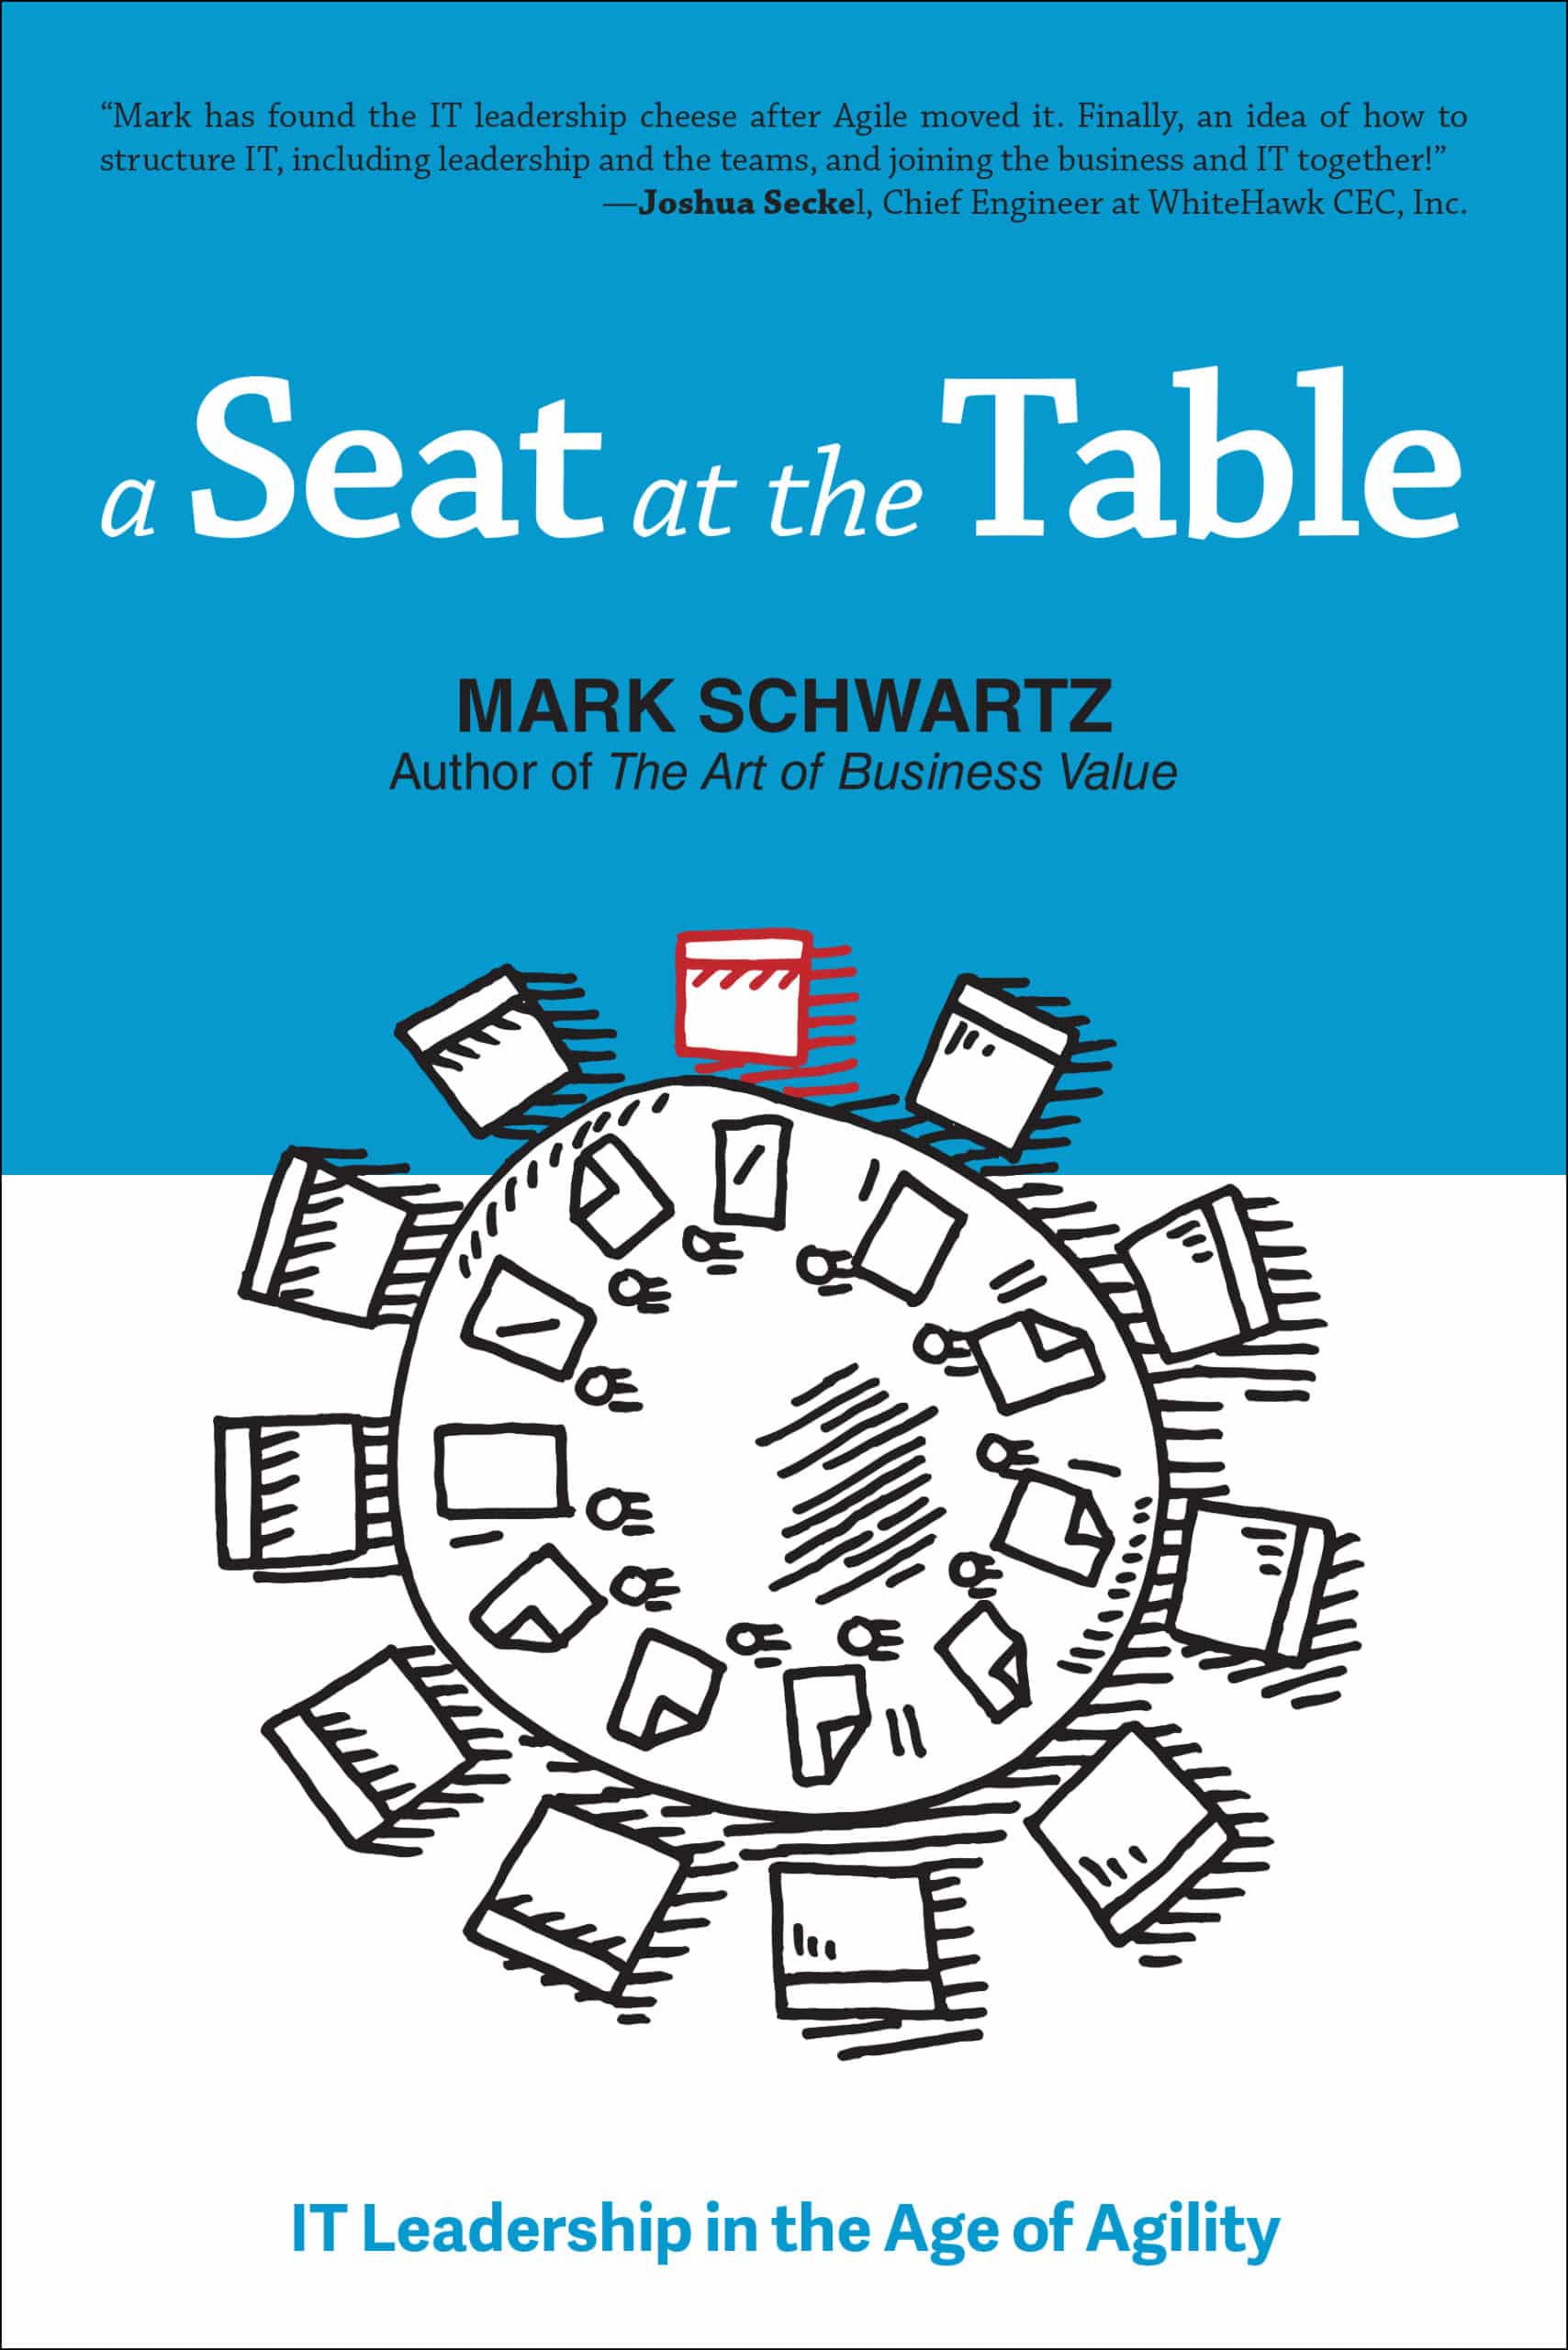 Cover of A Seat at the Table: IT Leadership in the Age of Agility by Mark Schwartz.